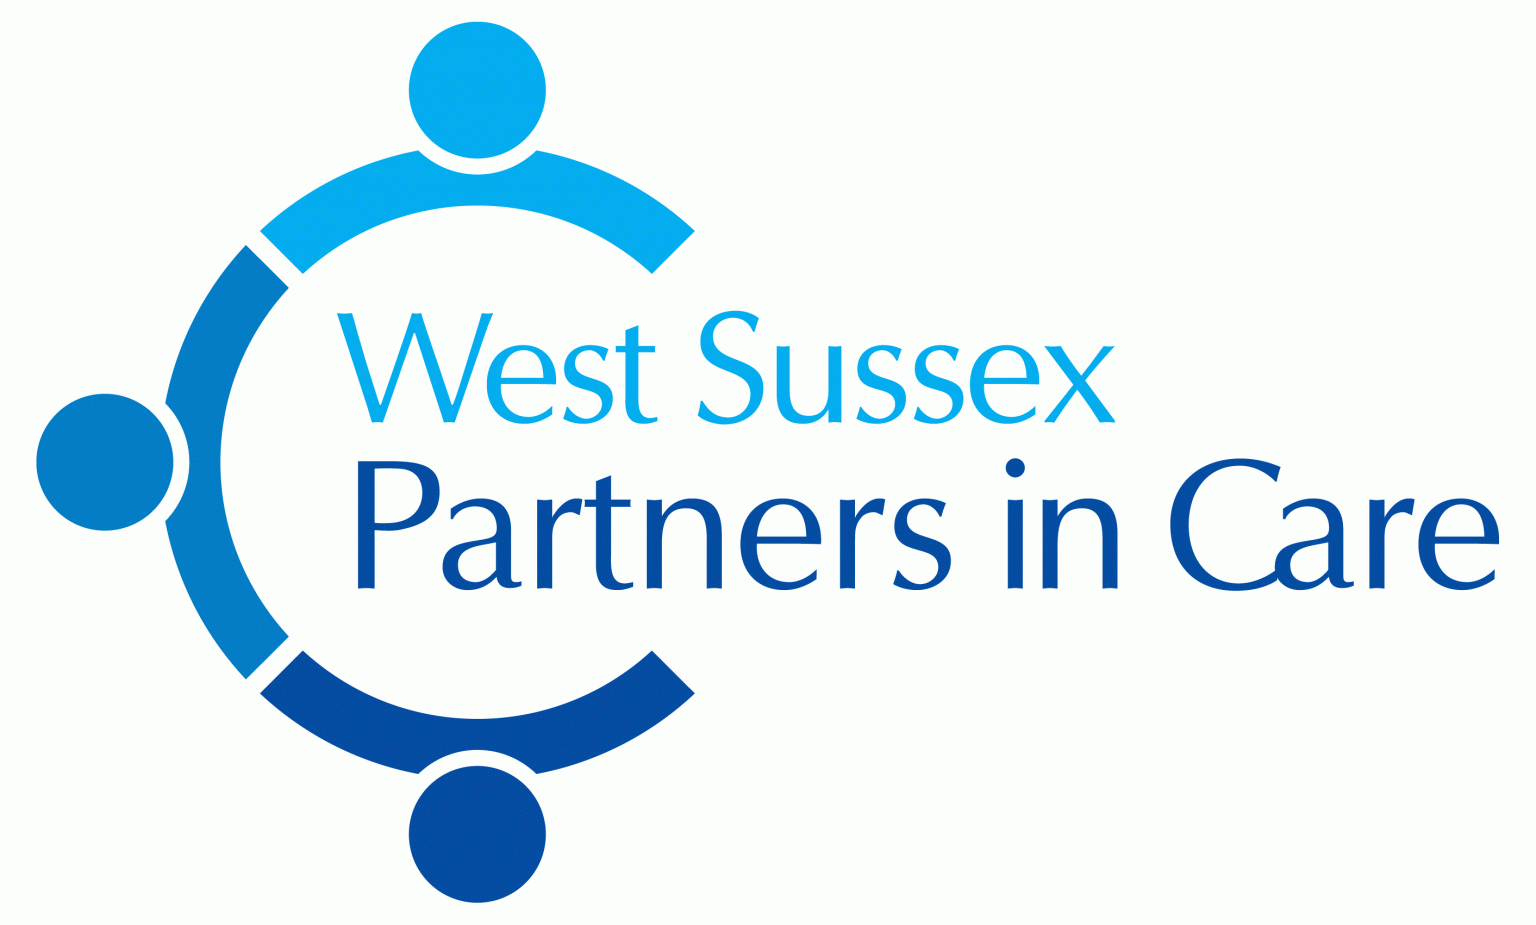 A logo of West Sussex Partners in Care